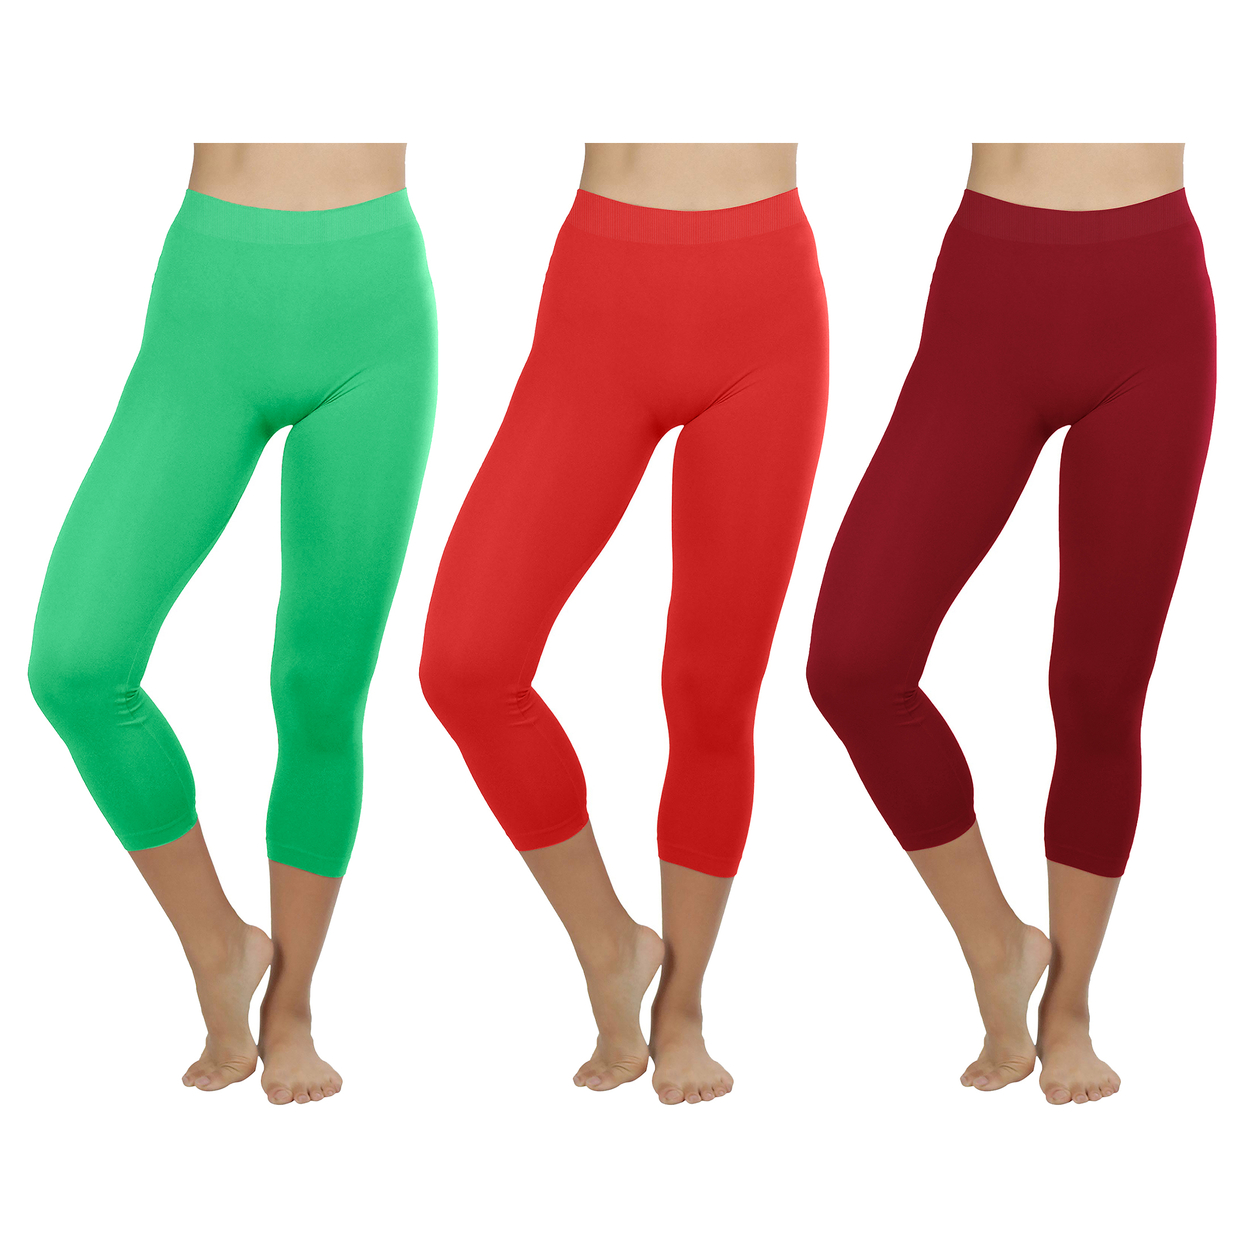 2-Pack: Women's Ultra-Soft High Waisted Smooth Stretch Active Yoga Capri Leggings - Red & Red, Medium